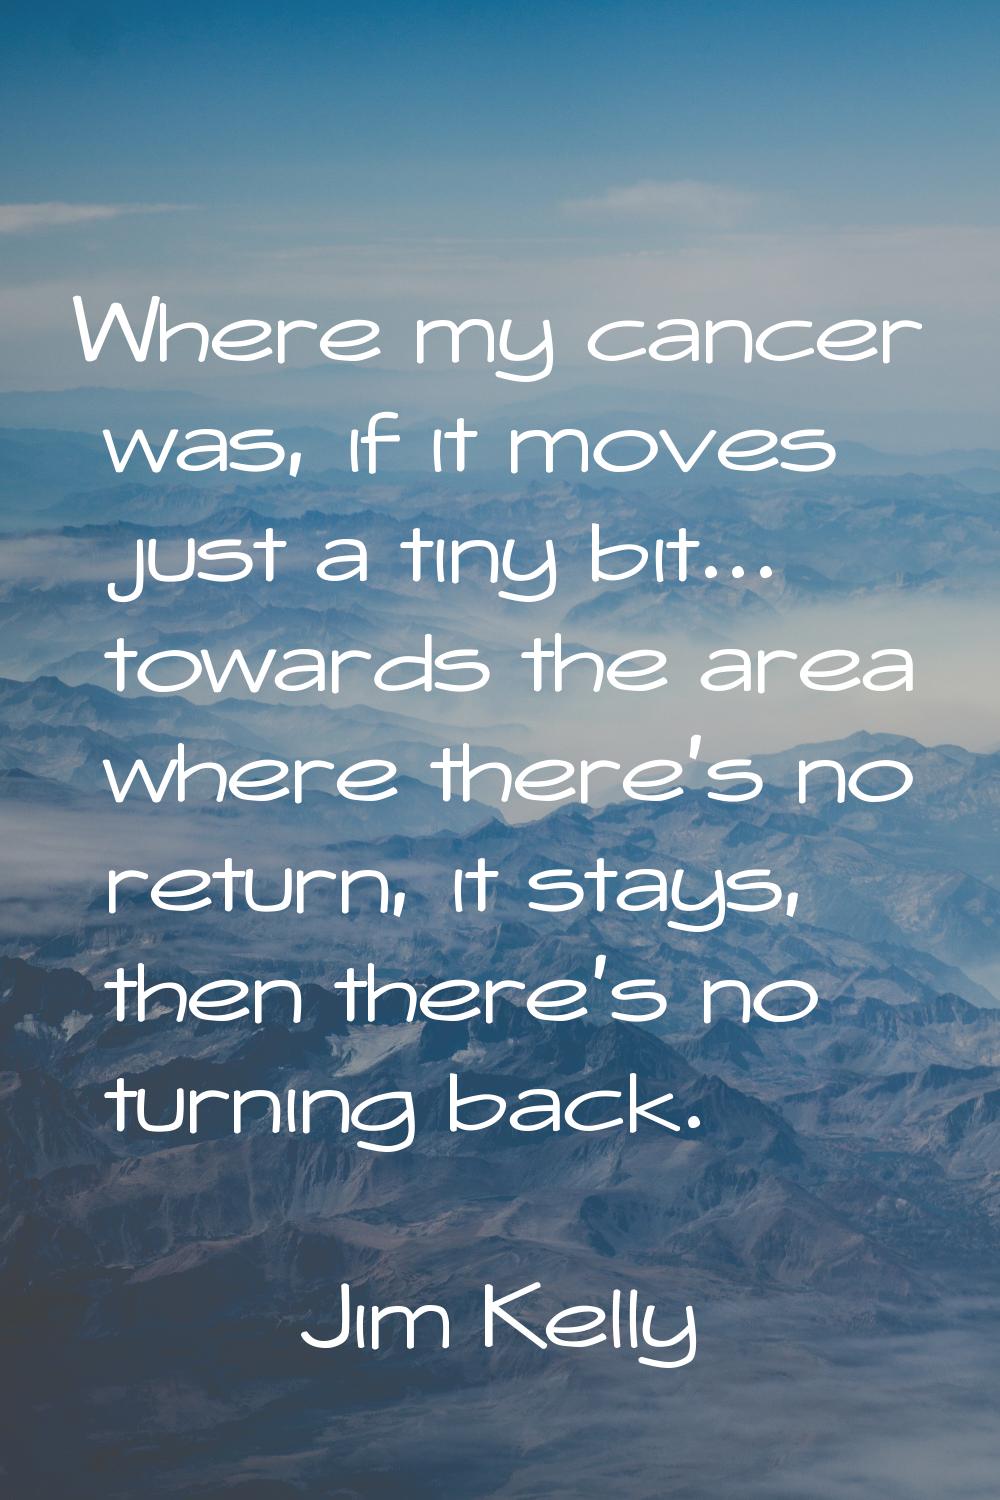 Where my cancer was, if it moves just a tiny bit... towards the area where there's no return, it st